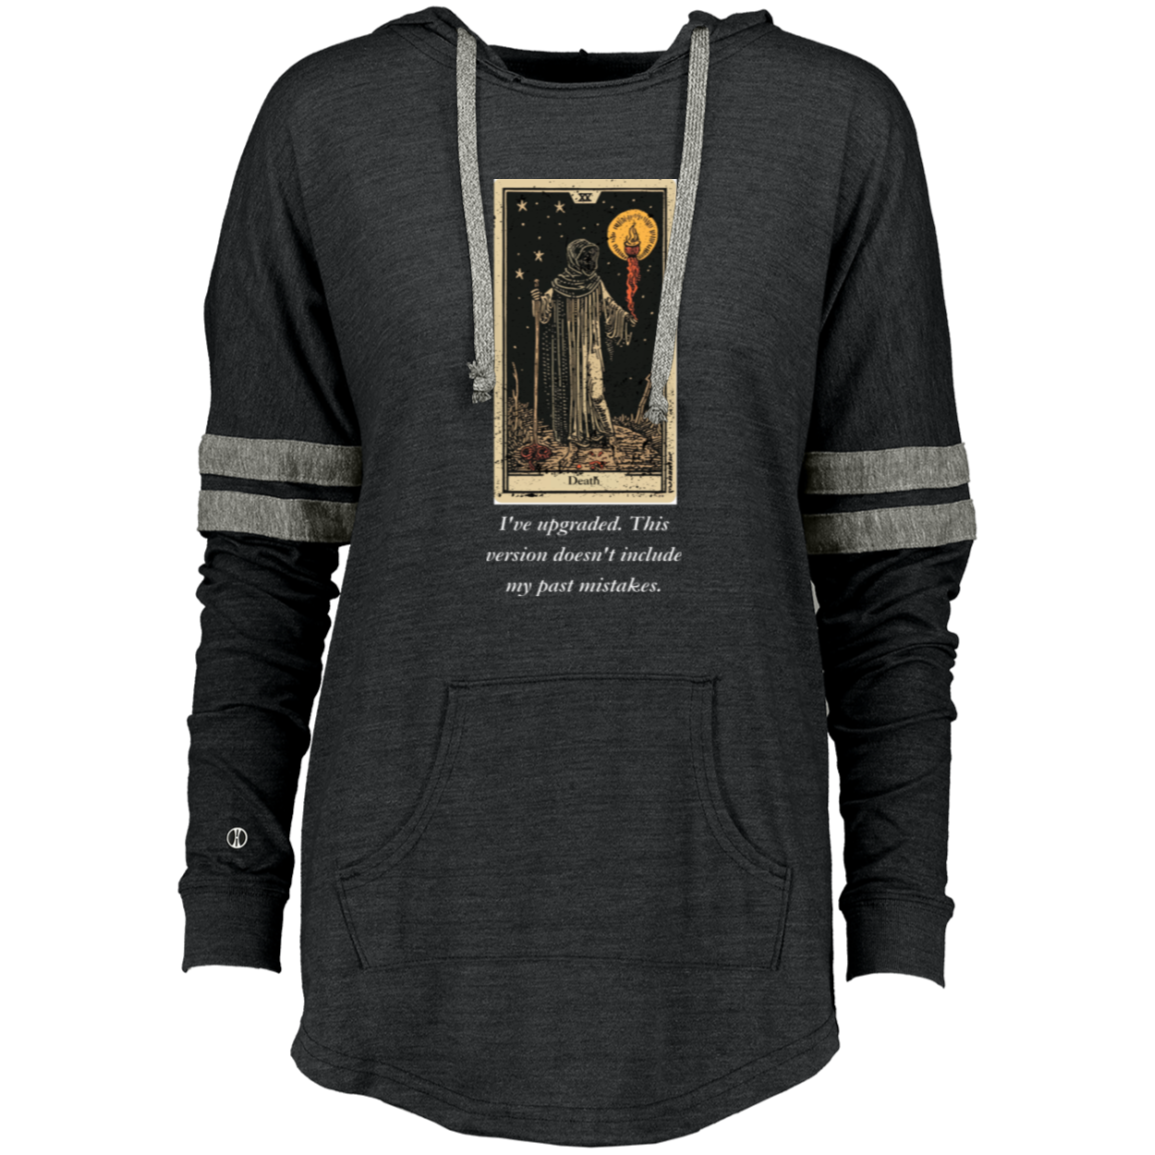 Funny death women's black tarot card hoodie pullover from BLK Moon Shop